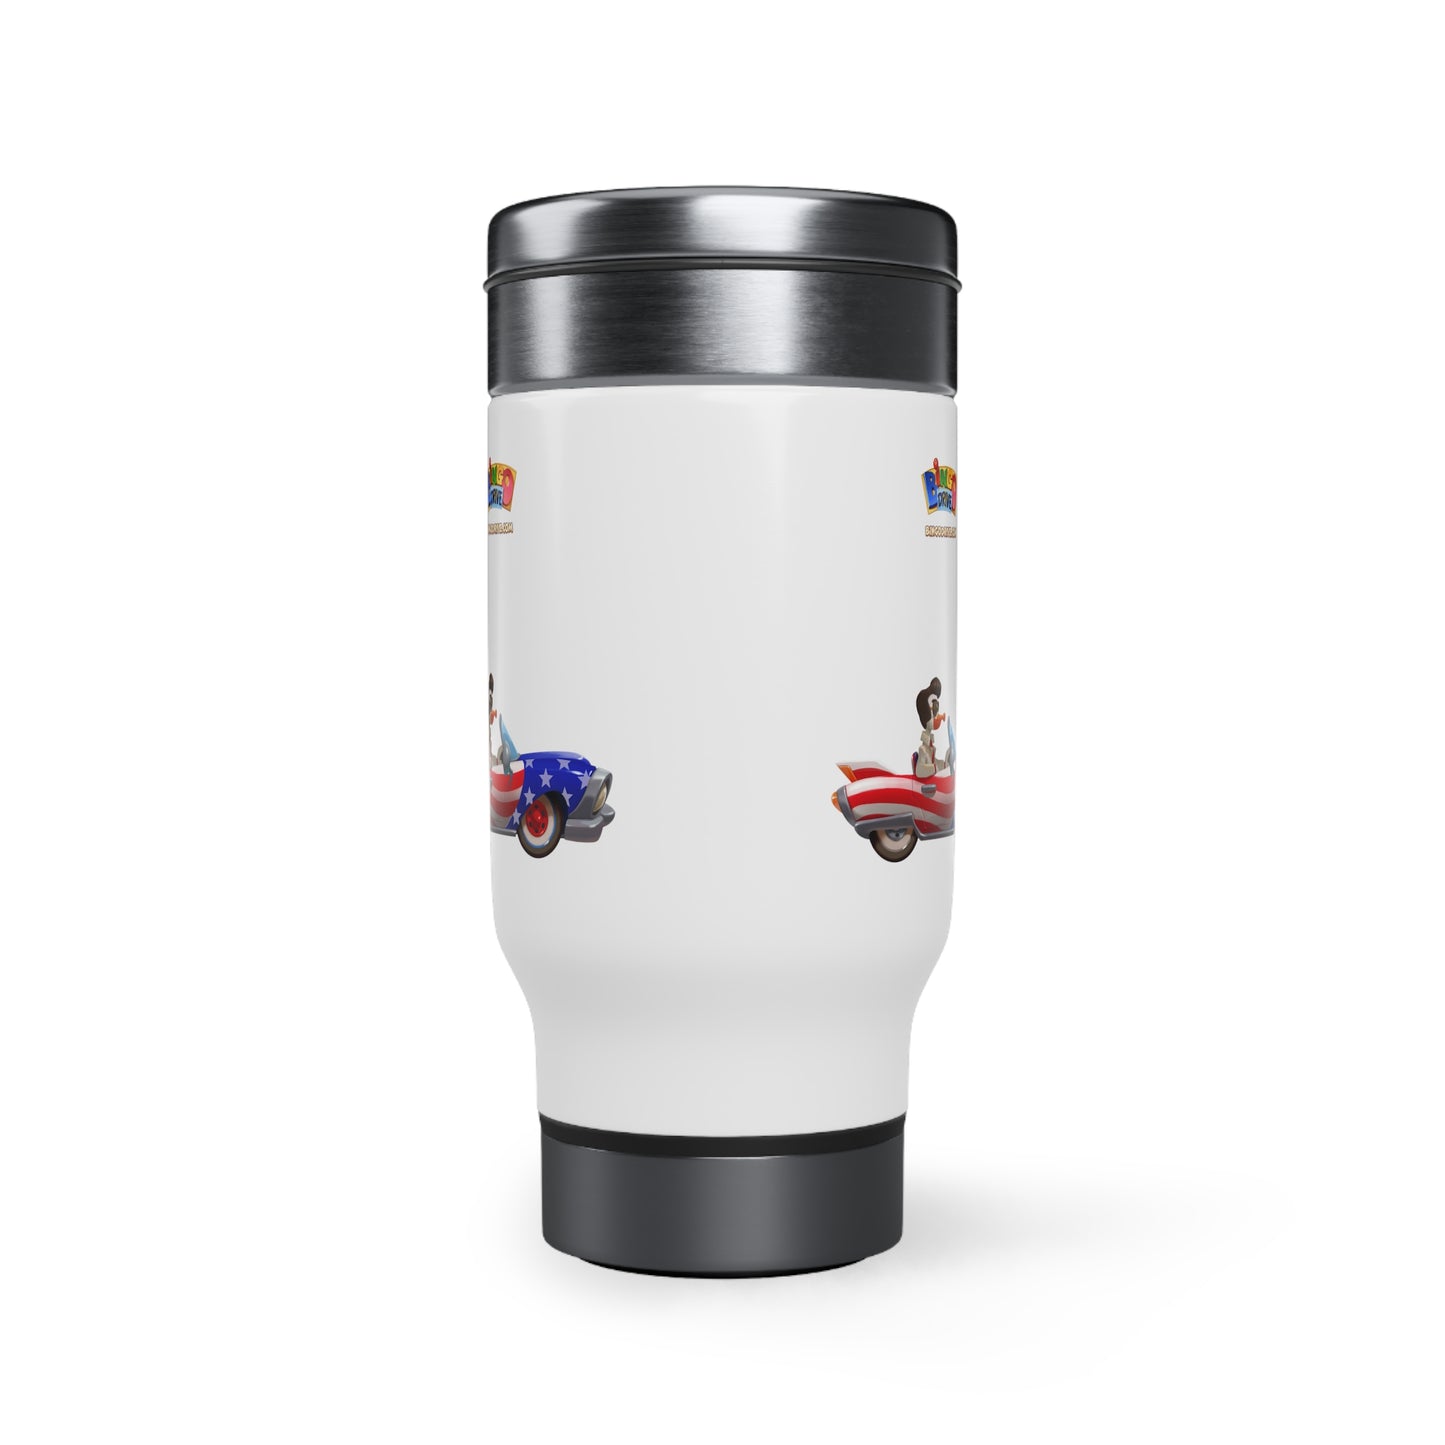 Drive American - Stainless Steel Travel Mug with Handle, 14oz